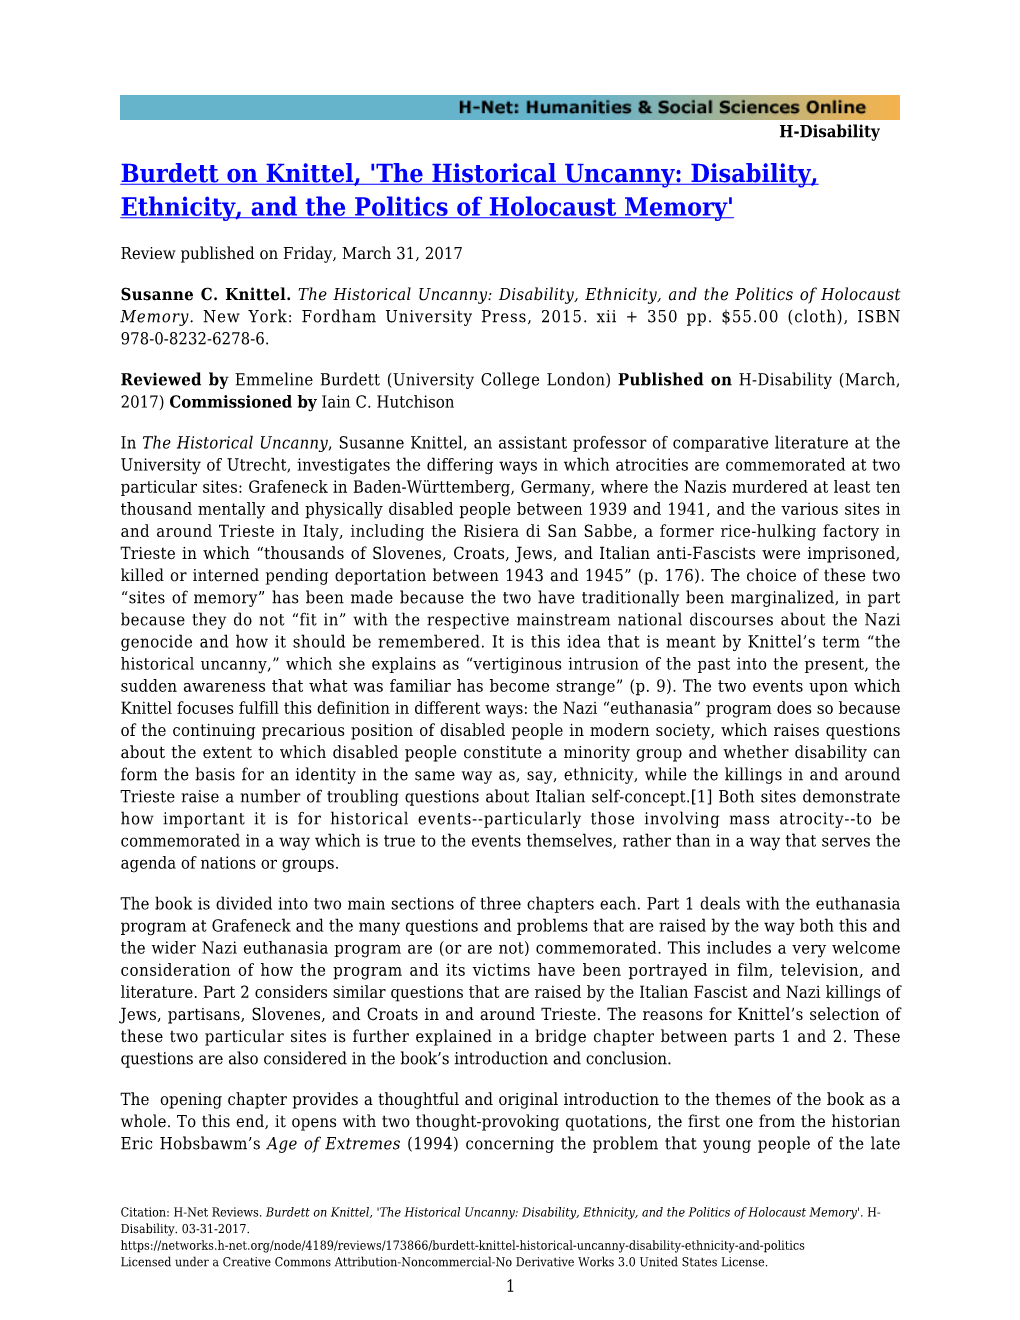 Burdett on Knittel, 'The Historical Uncanny: Disability, Ethnicity, and the Politics of Holocaust Memory'